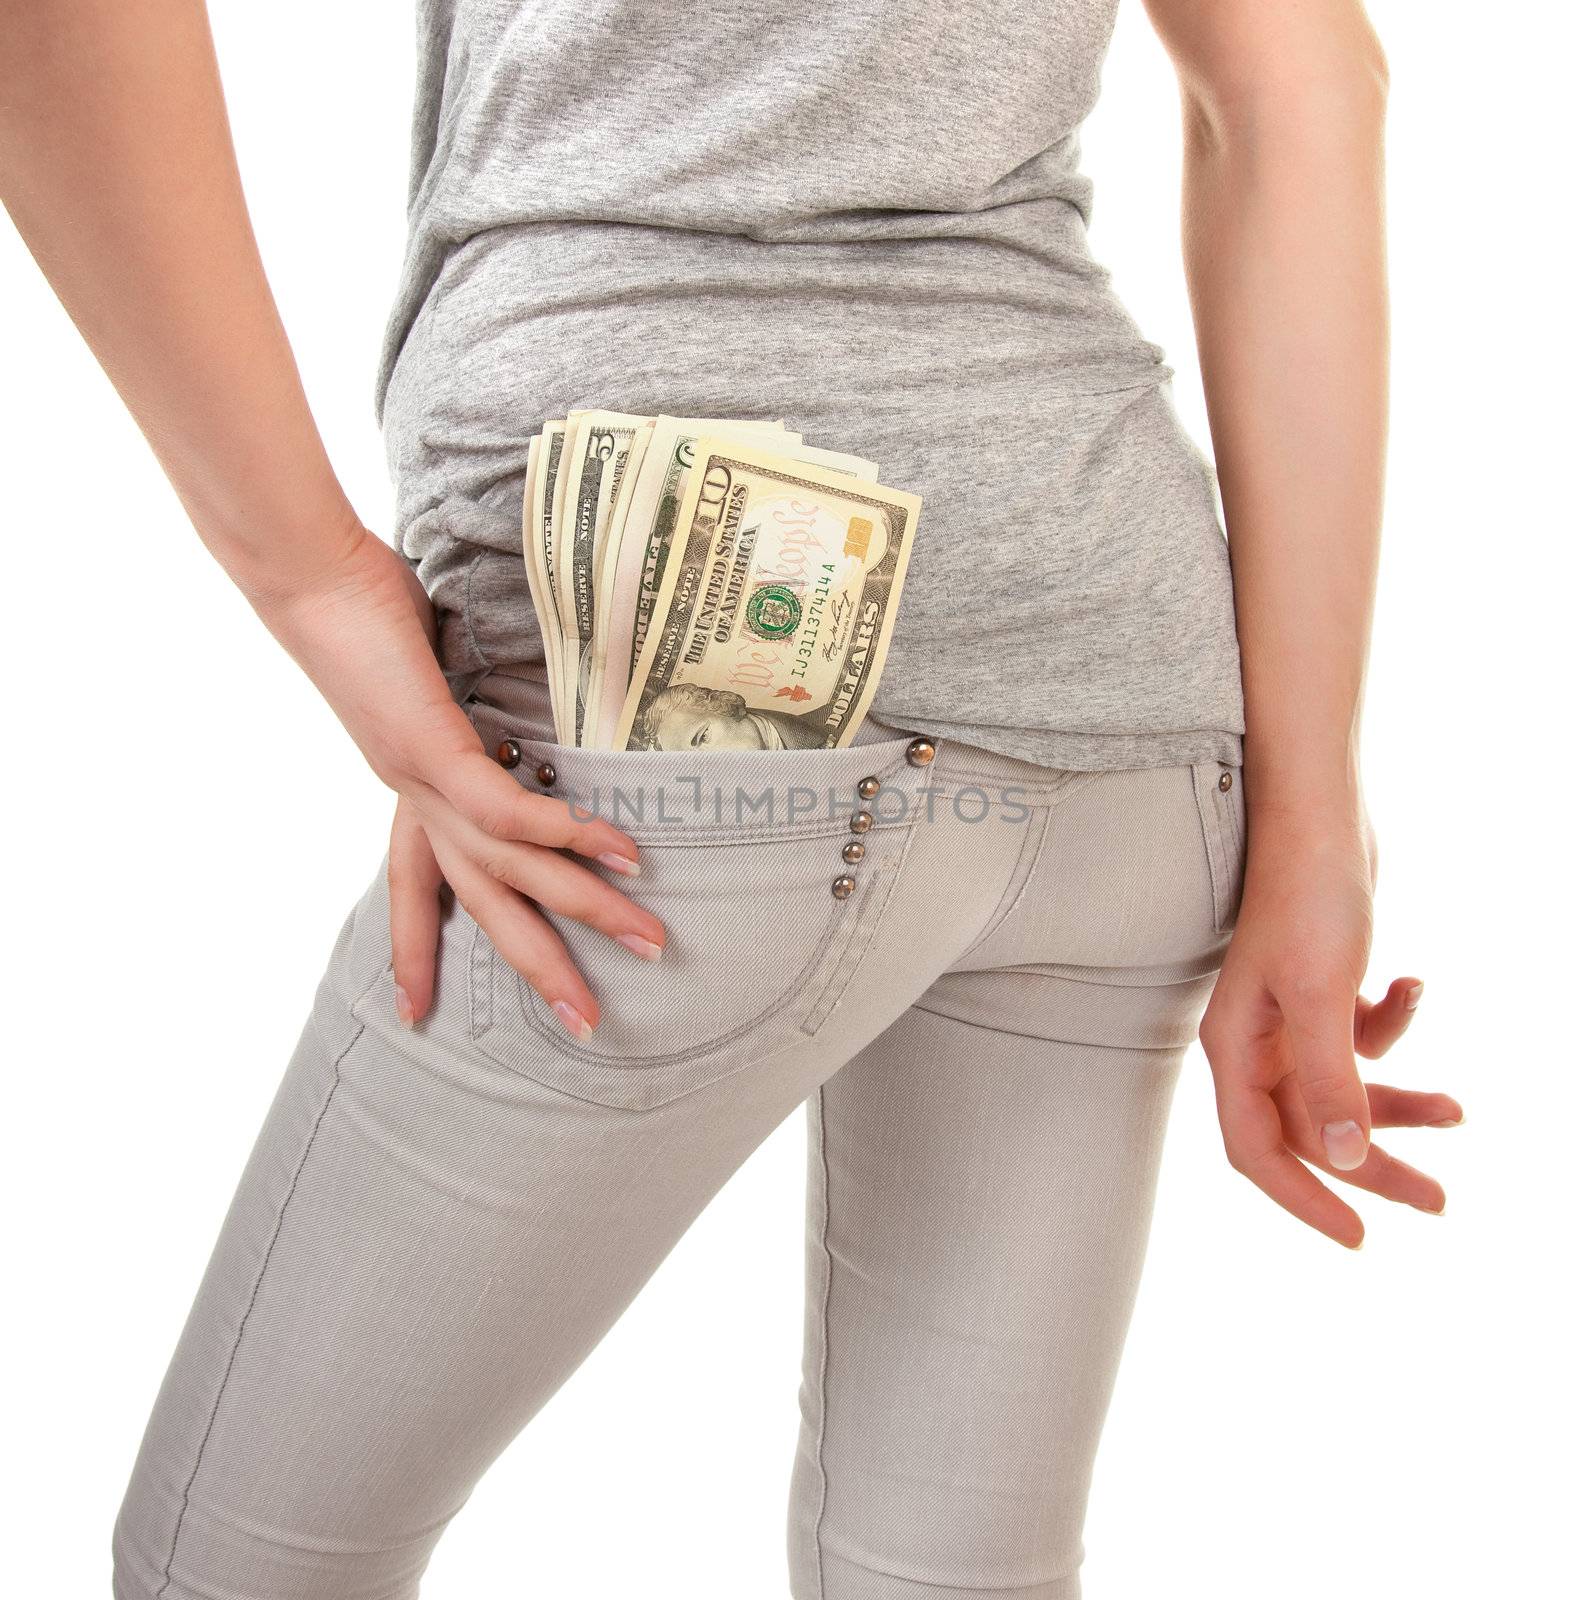 hooligan looking girl with the money on a white background